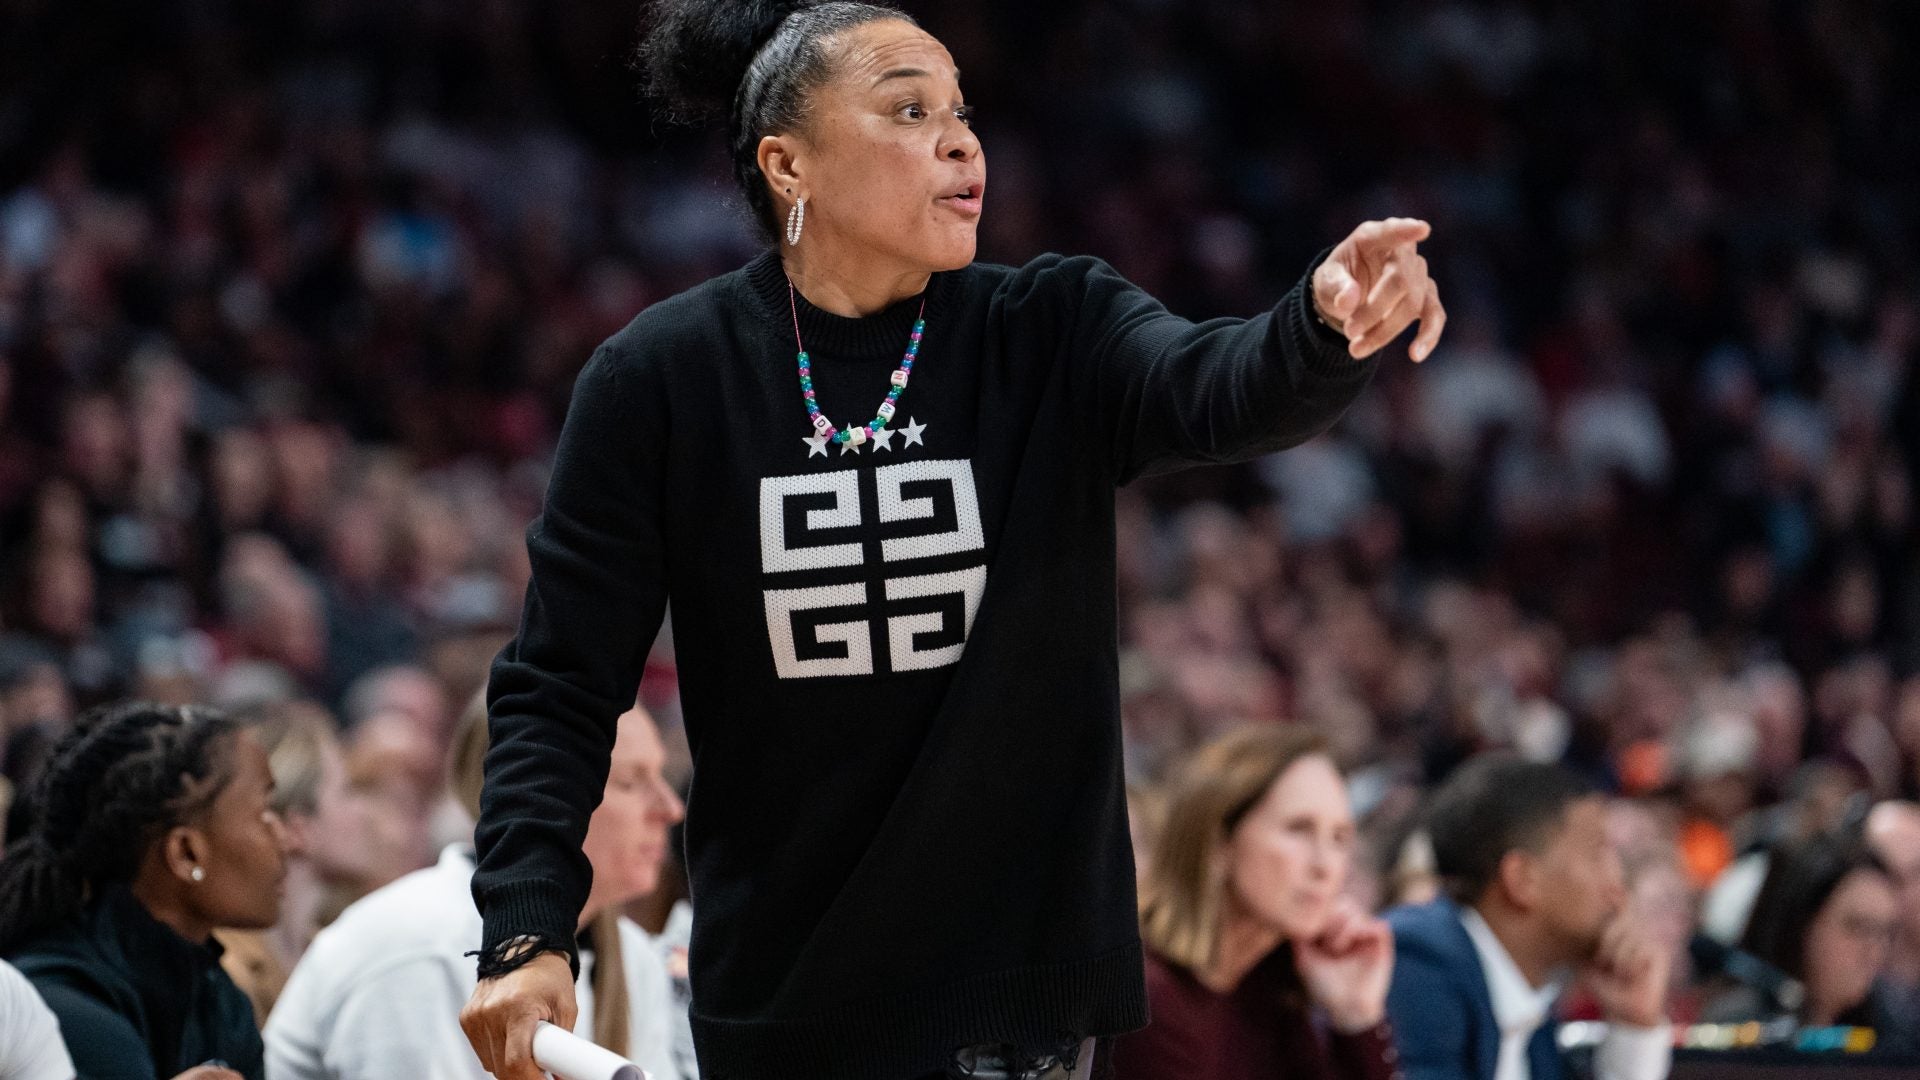 A Closer Look At The Designer Looks Of Dawn Staley The NCAA’s Flyest Coach